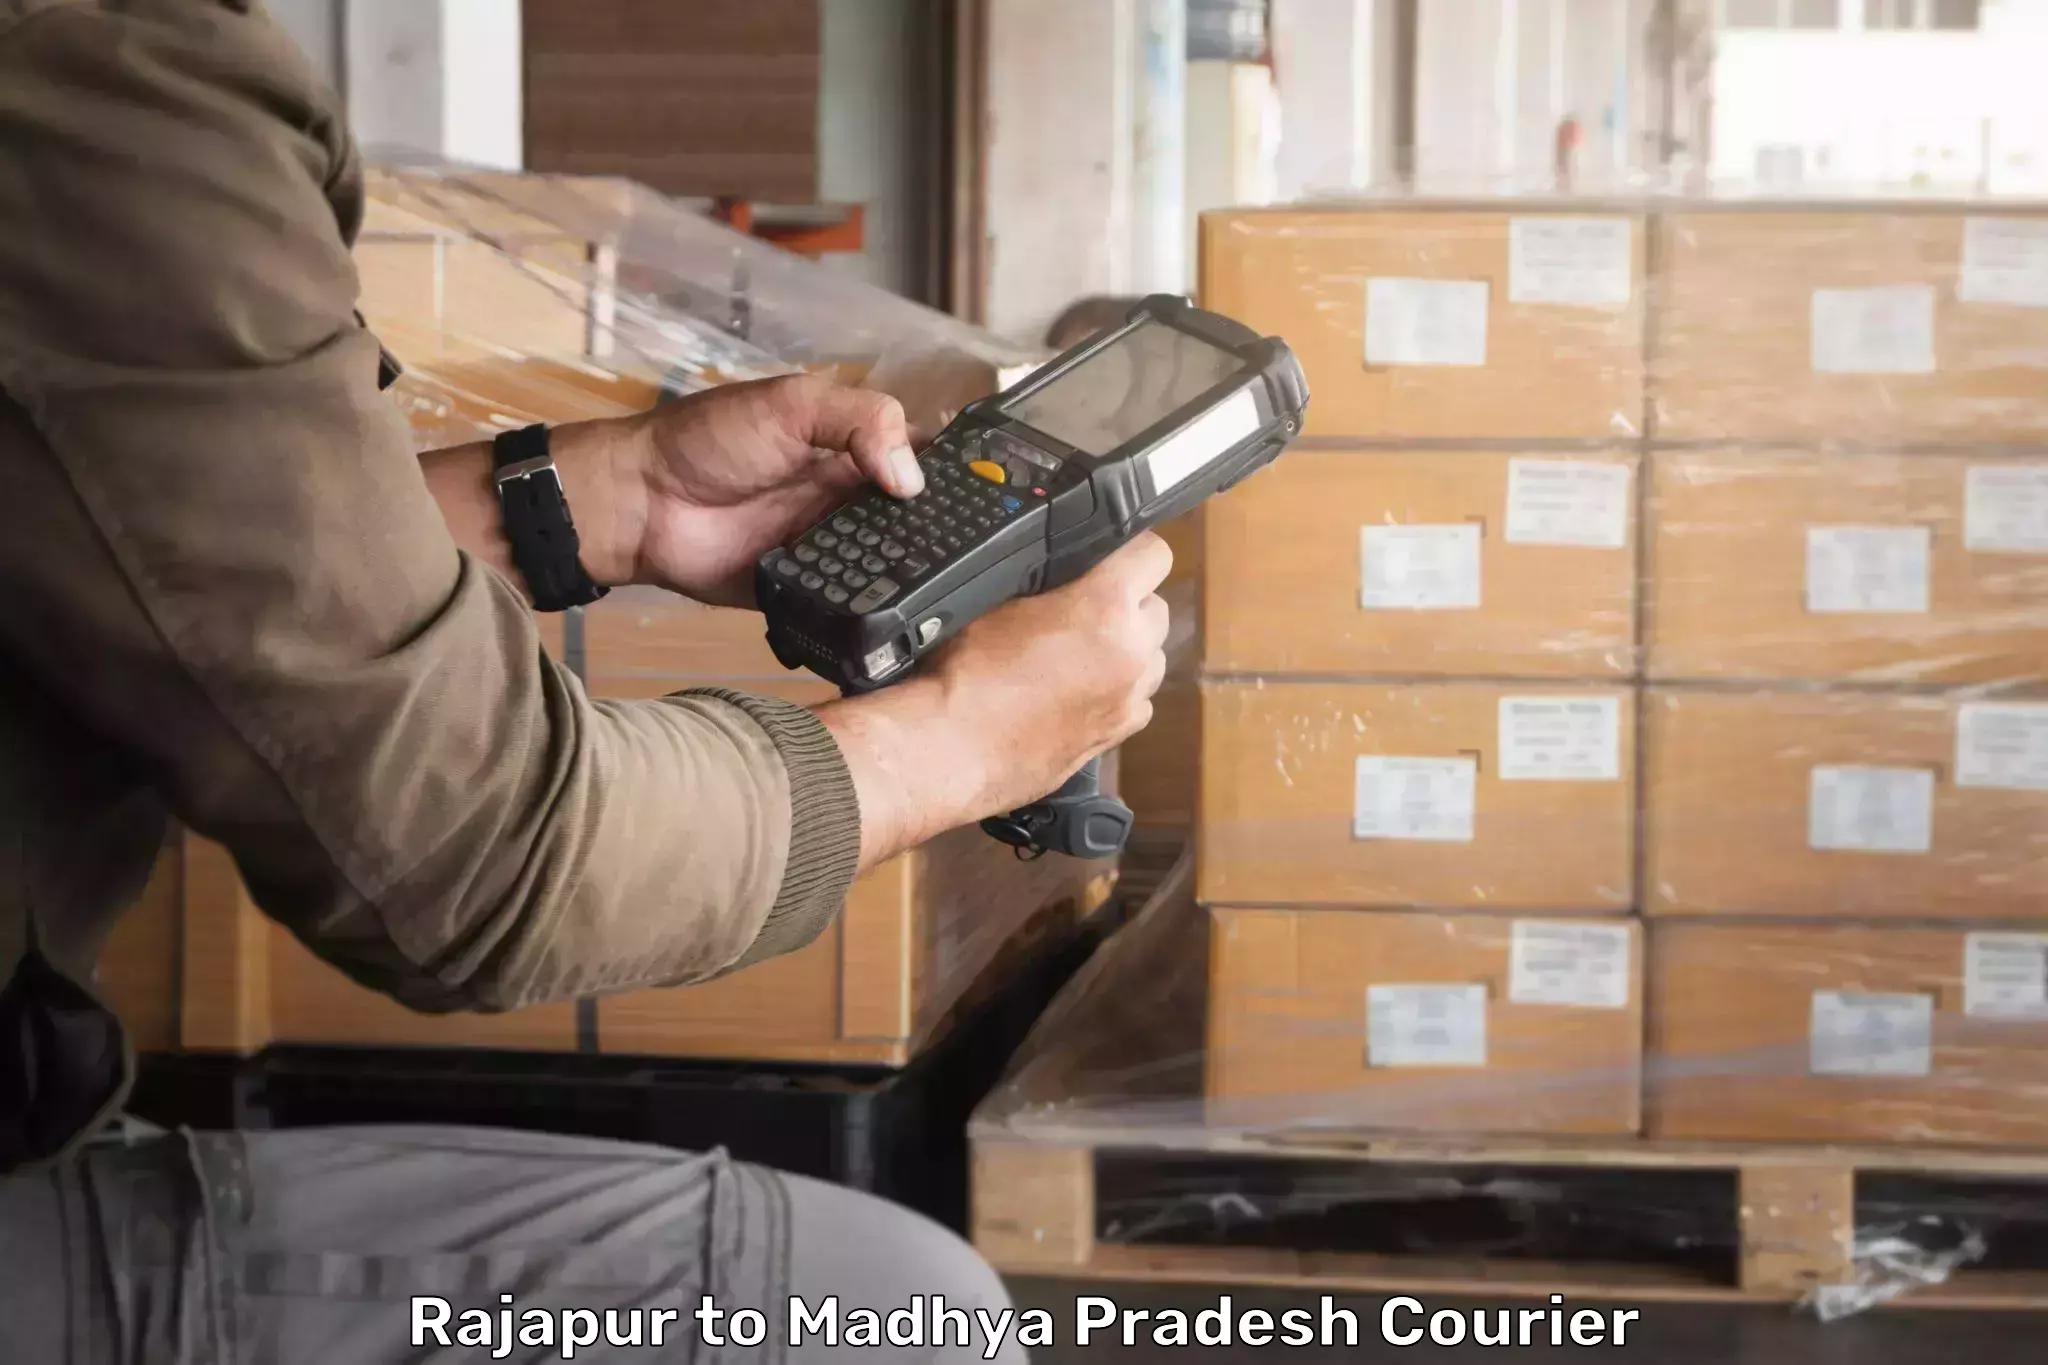 Residential courier service Rajapur to Gotegaon